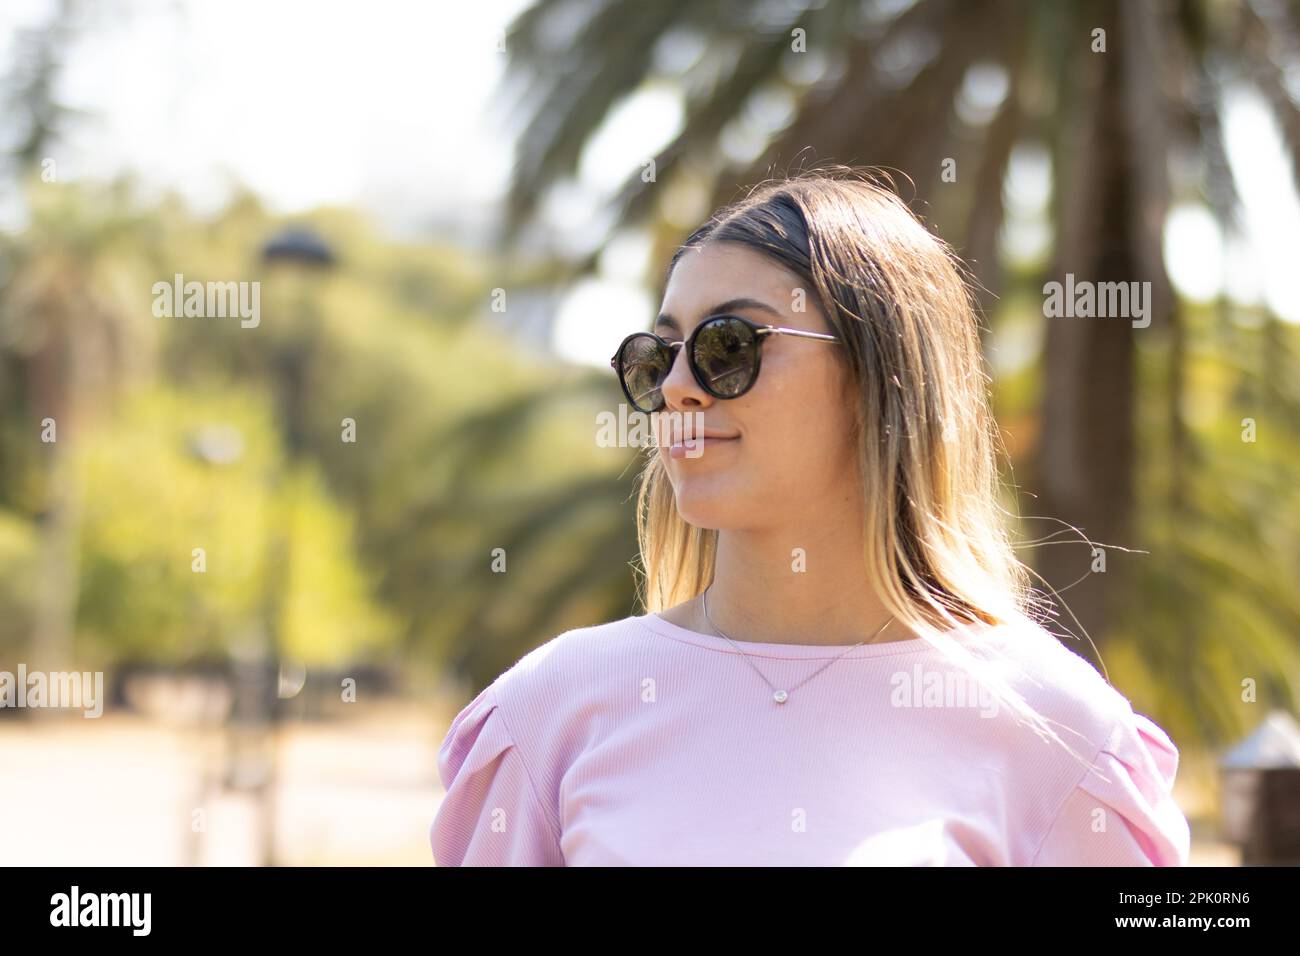 Teen girl with glasses enjoying her morning off in the park Stock Photo